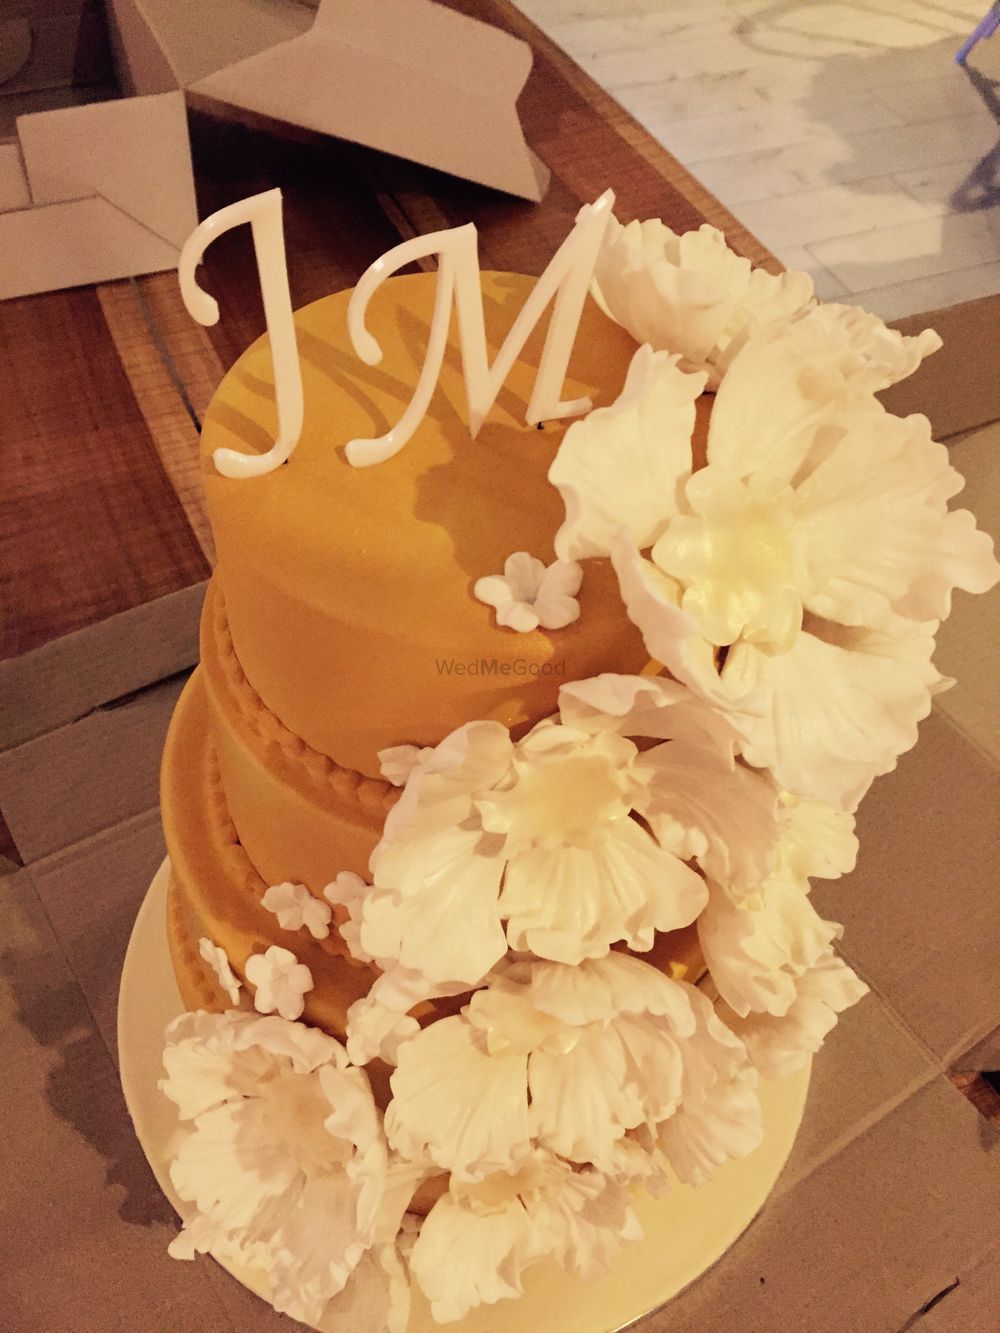 Photo of 3 Tier Wedding Cake with Monograms and Floral Decor